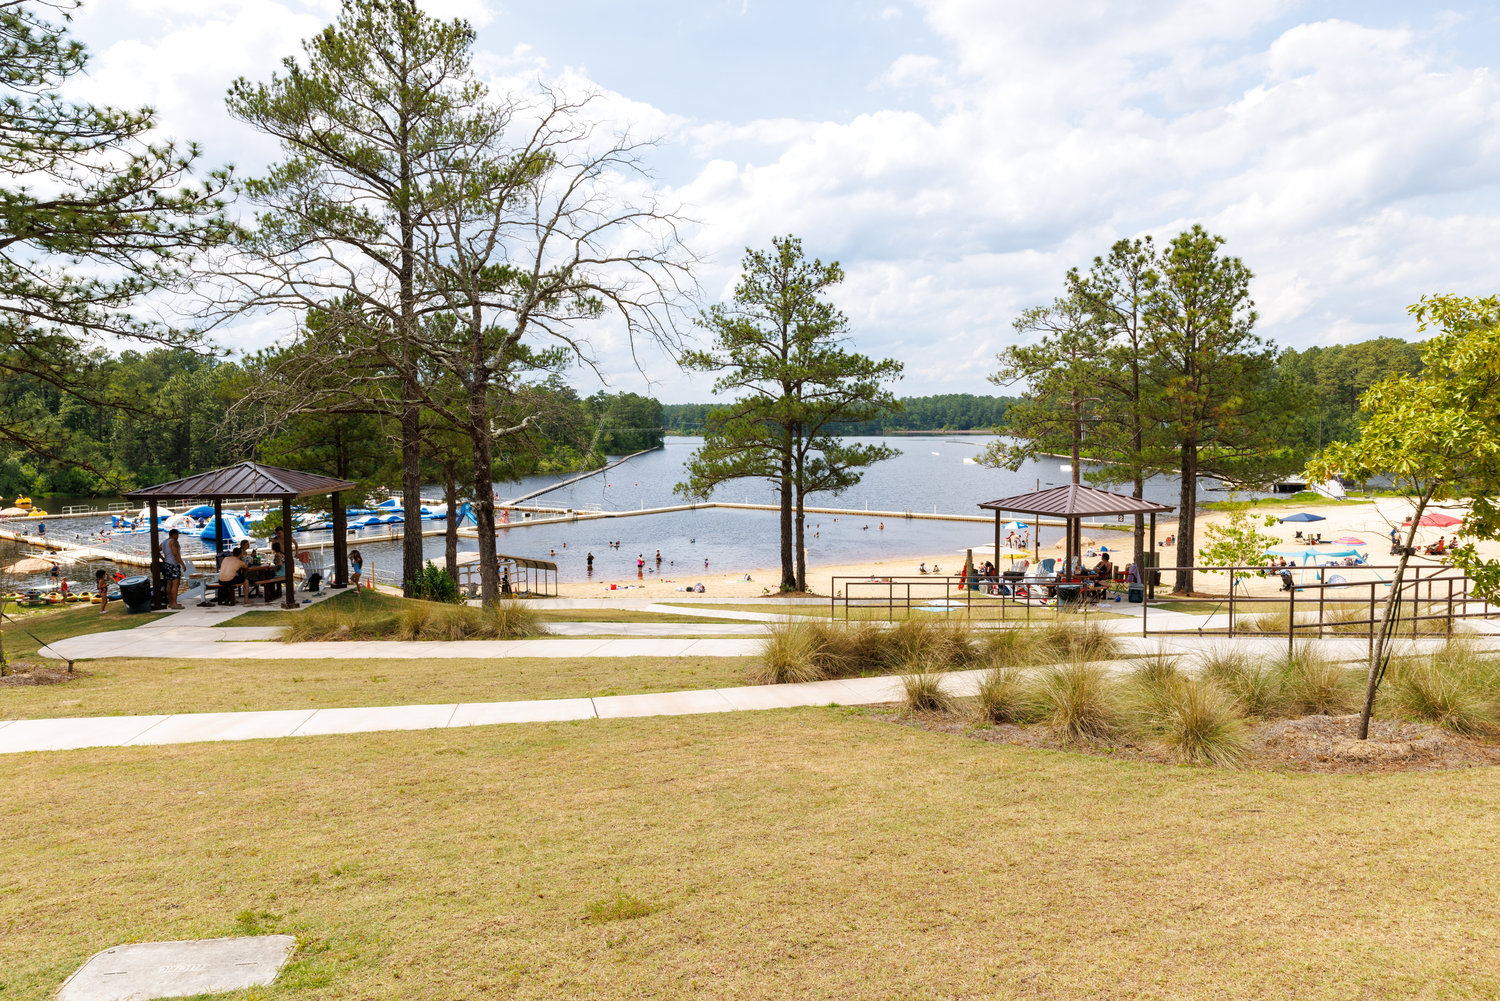 Smith Lake has a swimming area and water activities, including an inflatable in-water obstacle course.